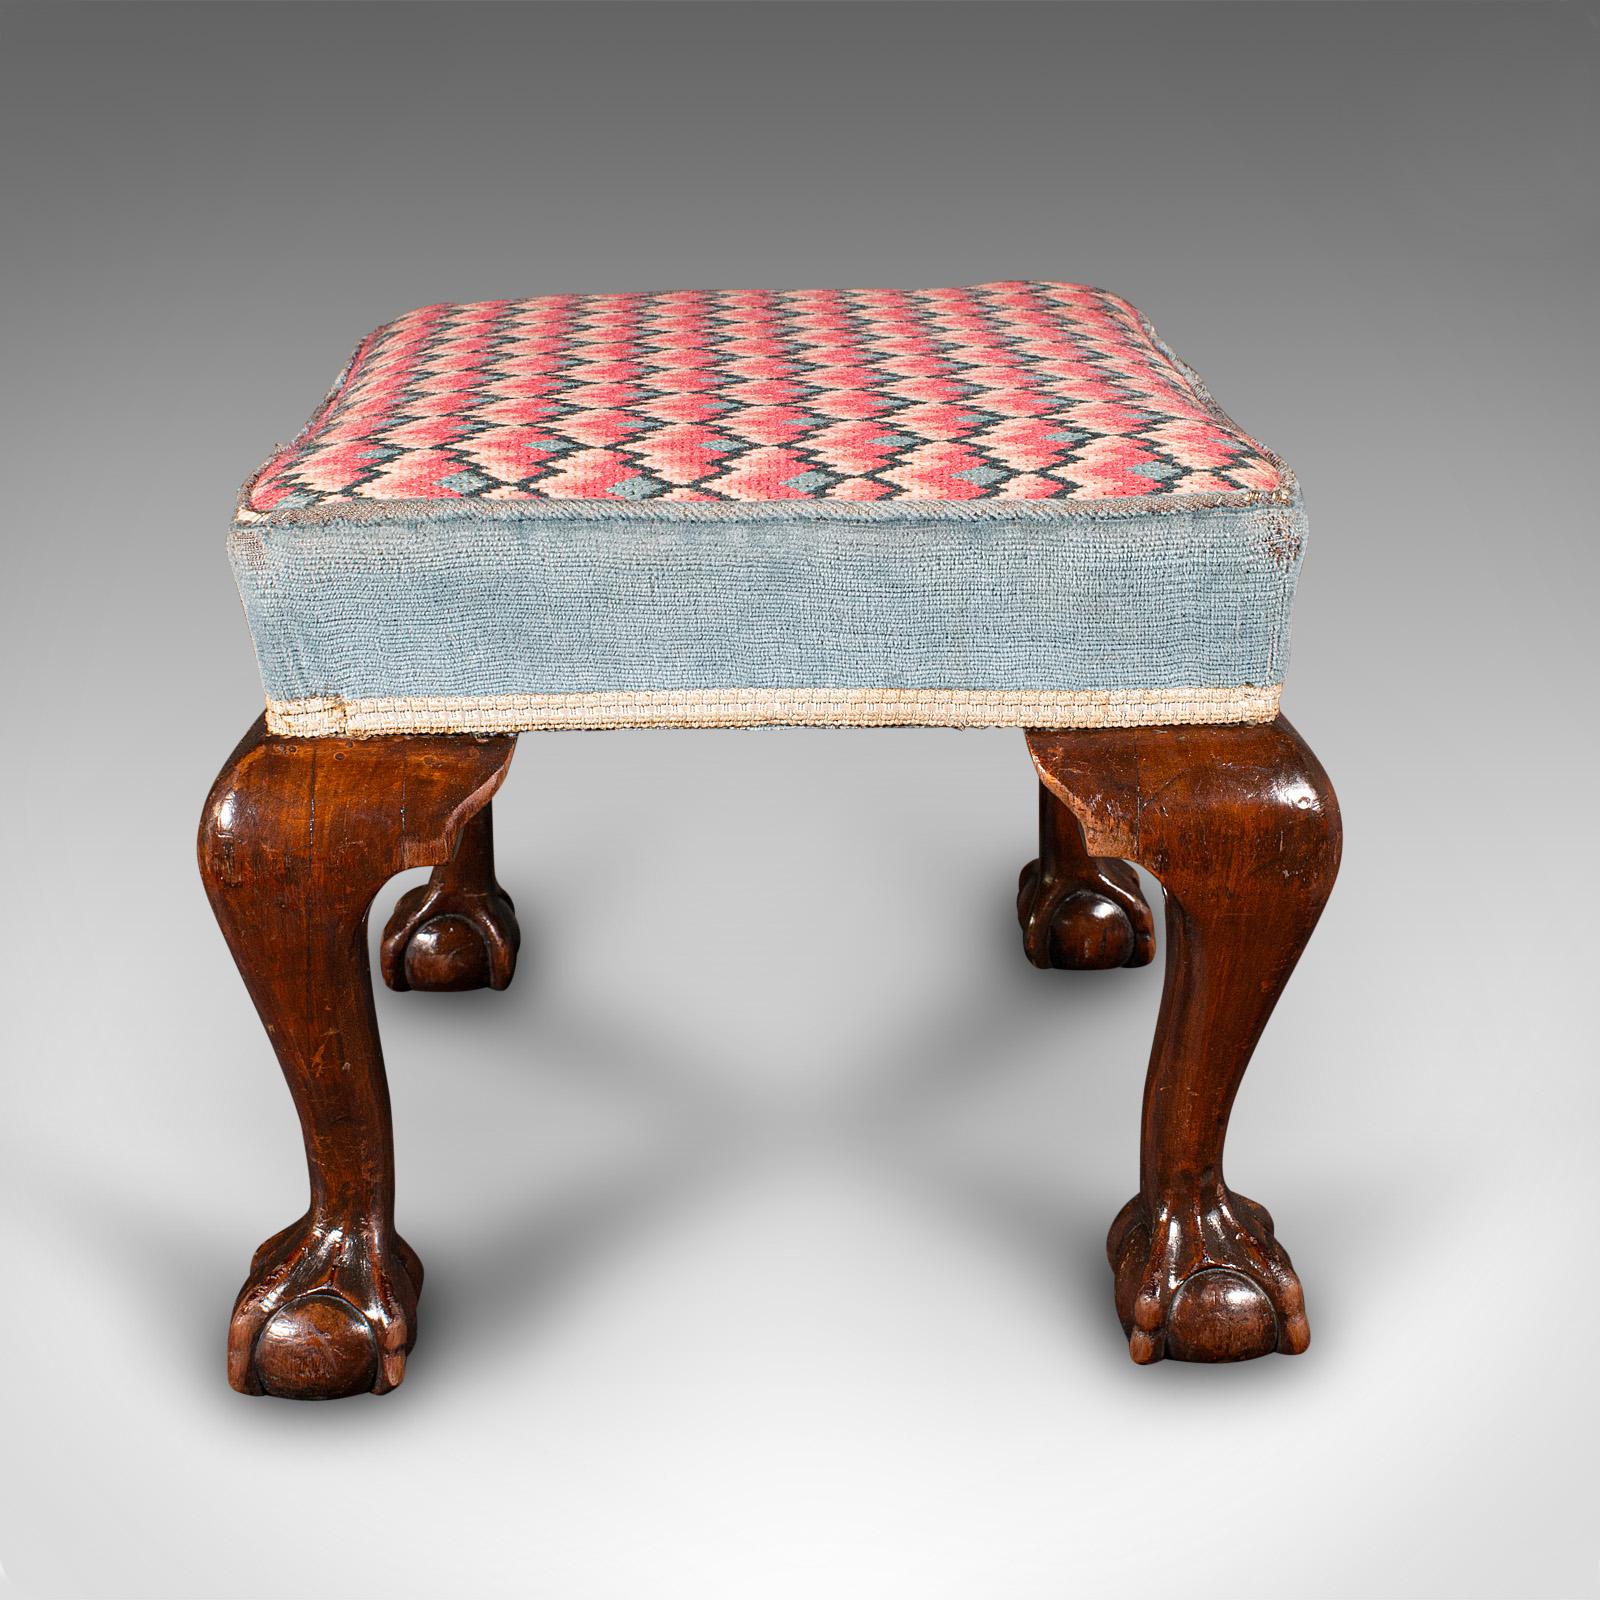 19th Century Antique Fireside Stool, English, Needlepoint, Footstool, Early Victorian, C.1850 For Sale